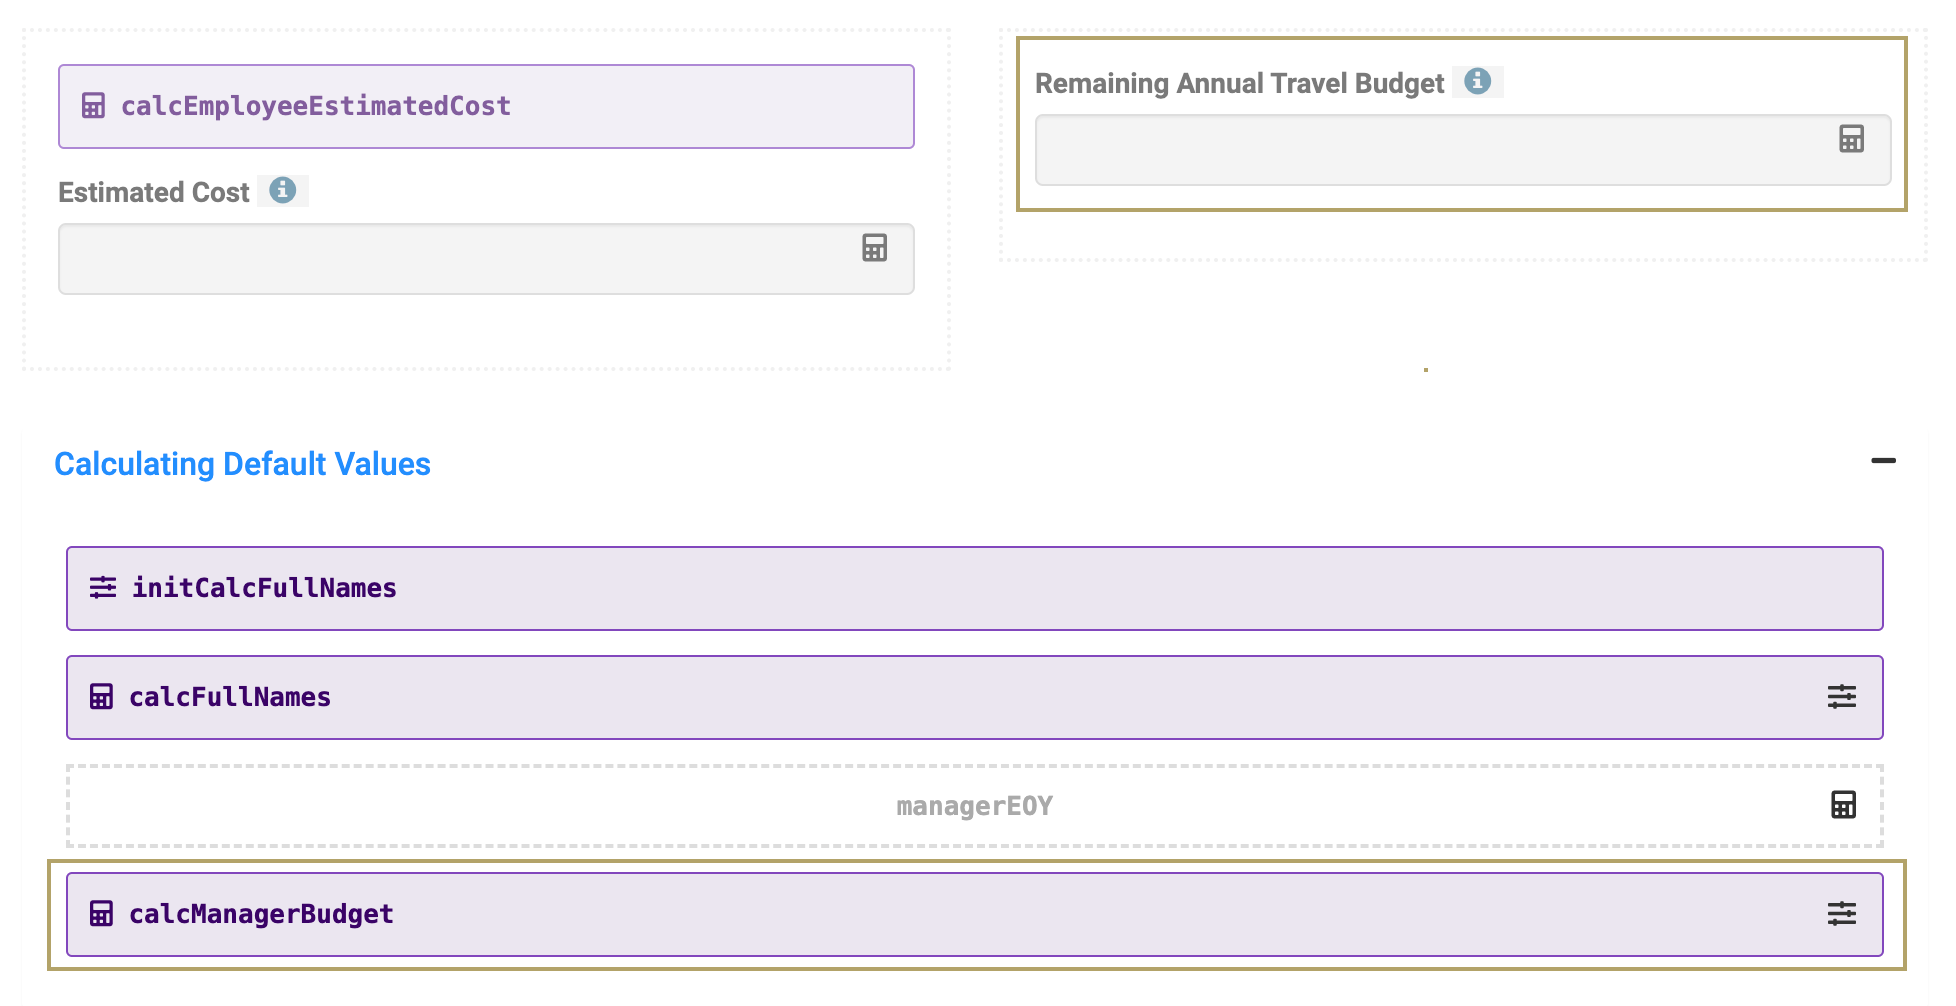 Image showing the calcManagerBudget Calculator component and the Remaining Annual Travel Budget field configuration in the Employee Travel Information module.